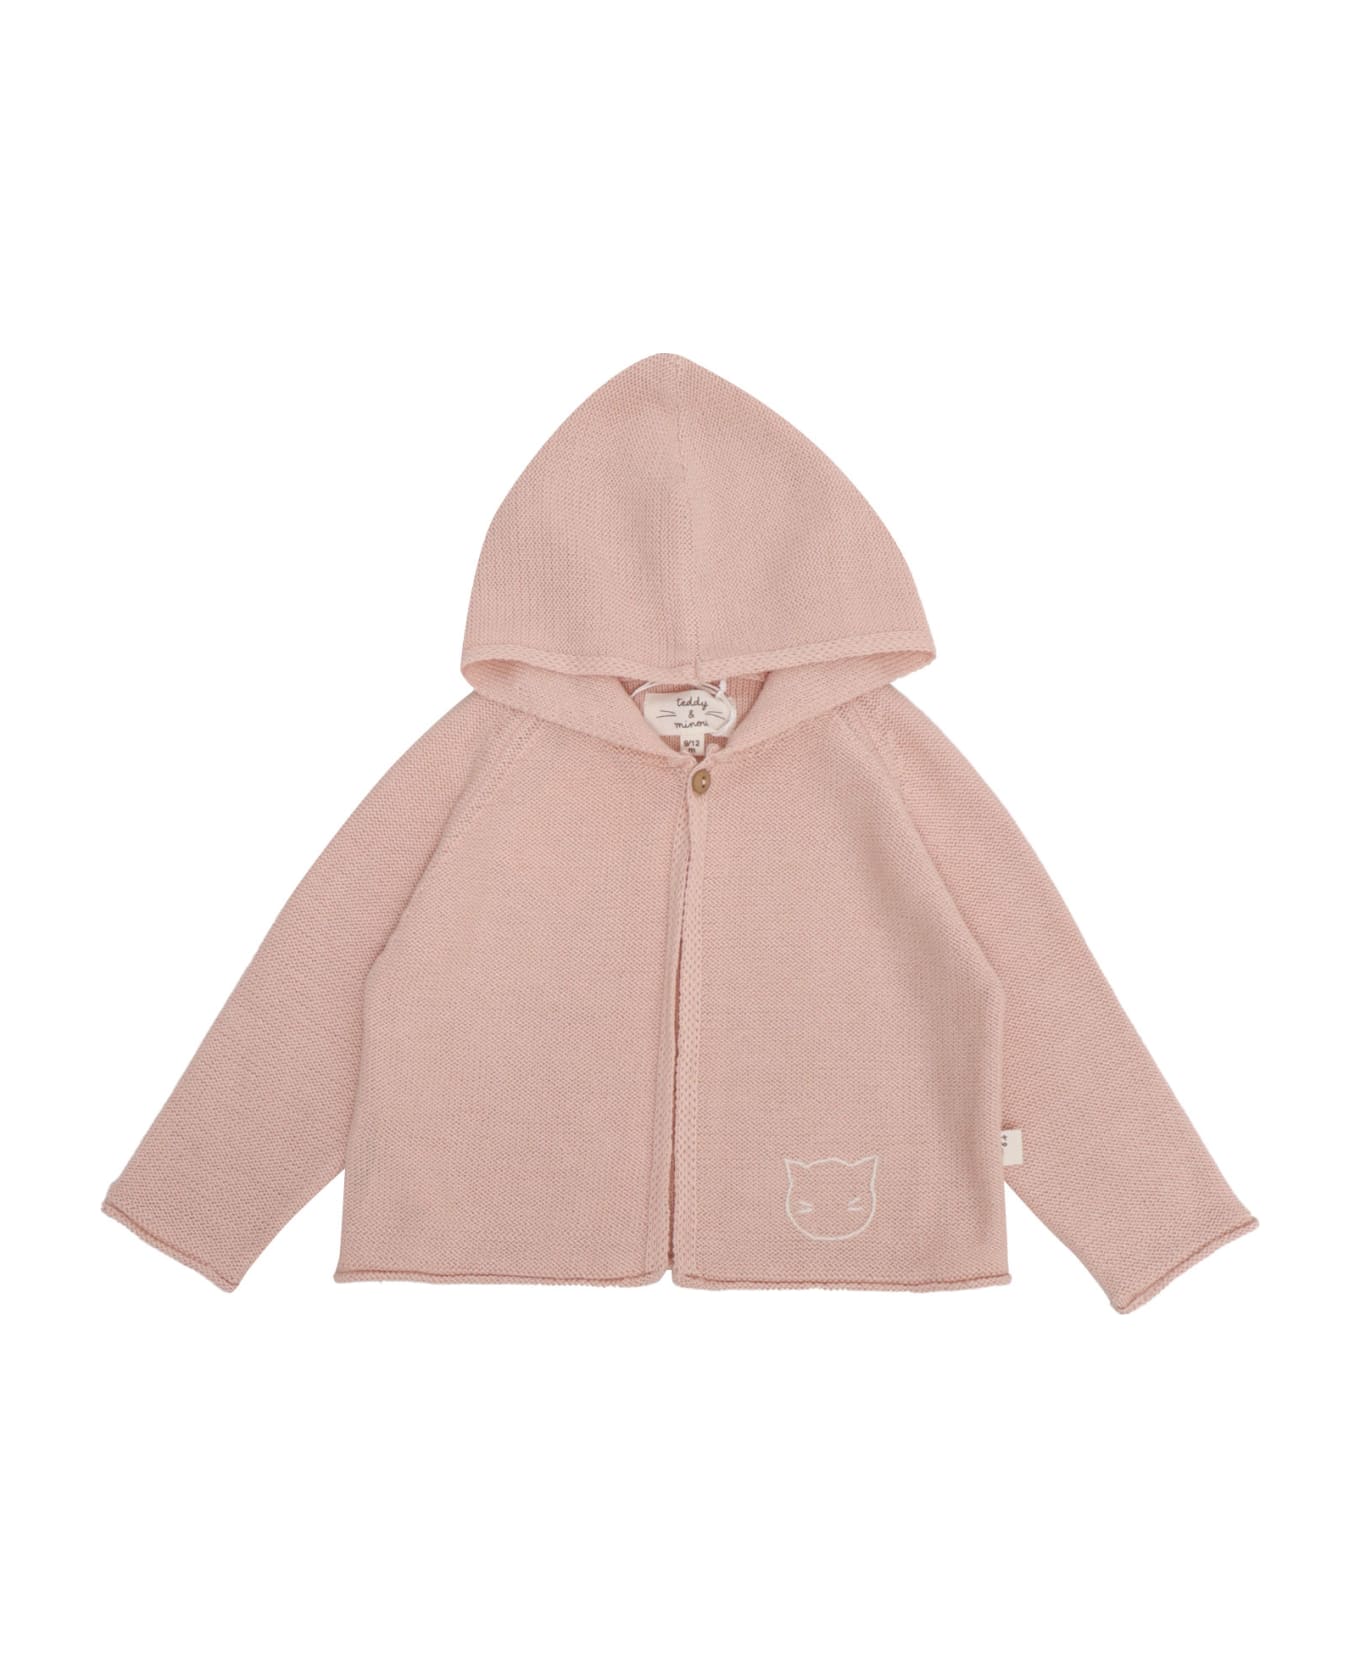 Teddy & Minou Knitted Sweater For Girls - PINK